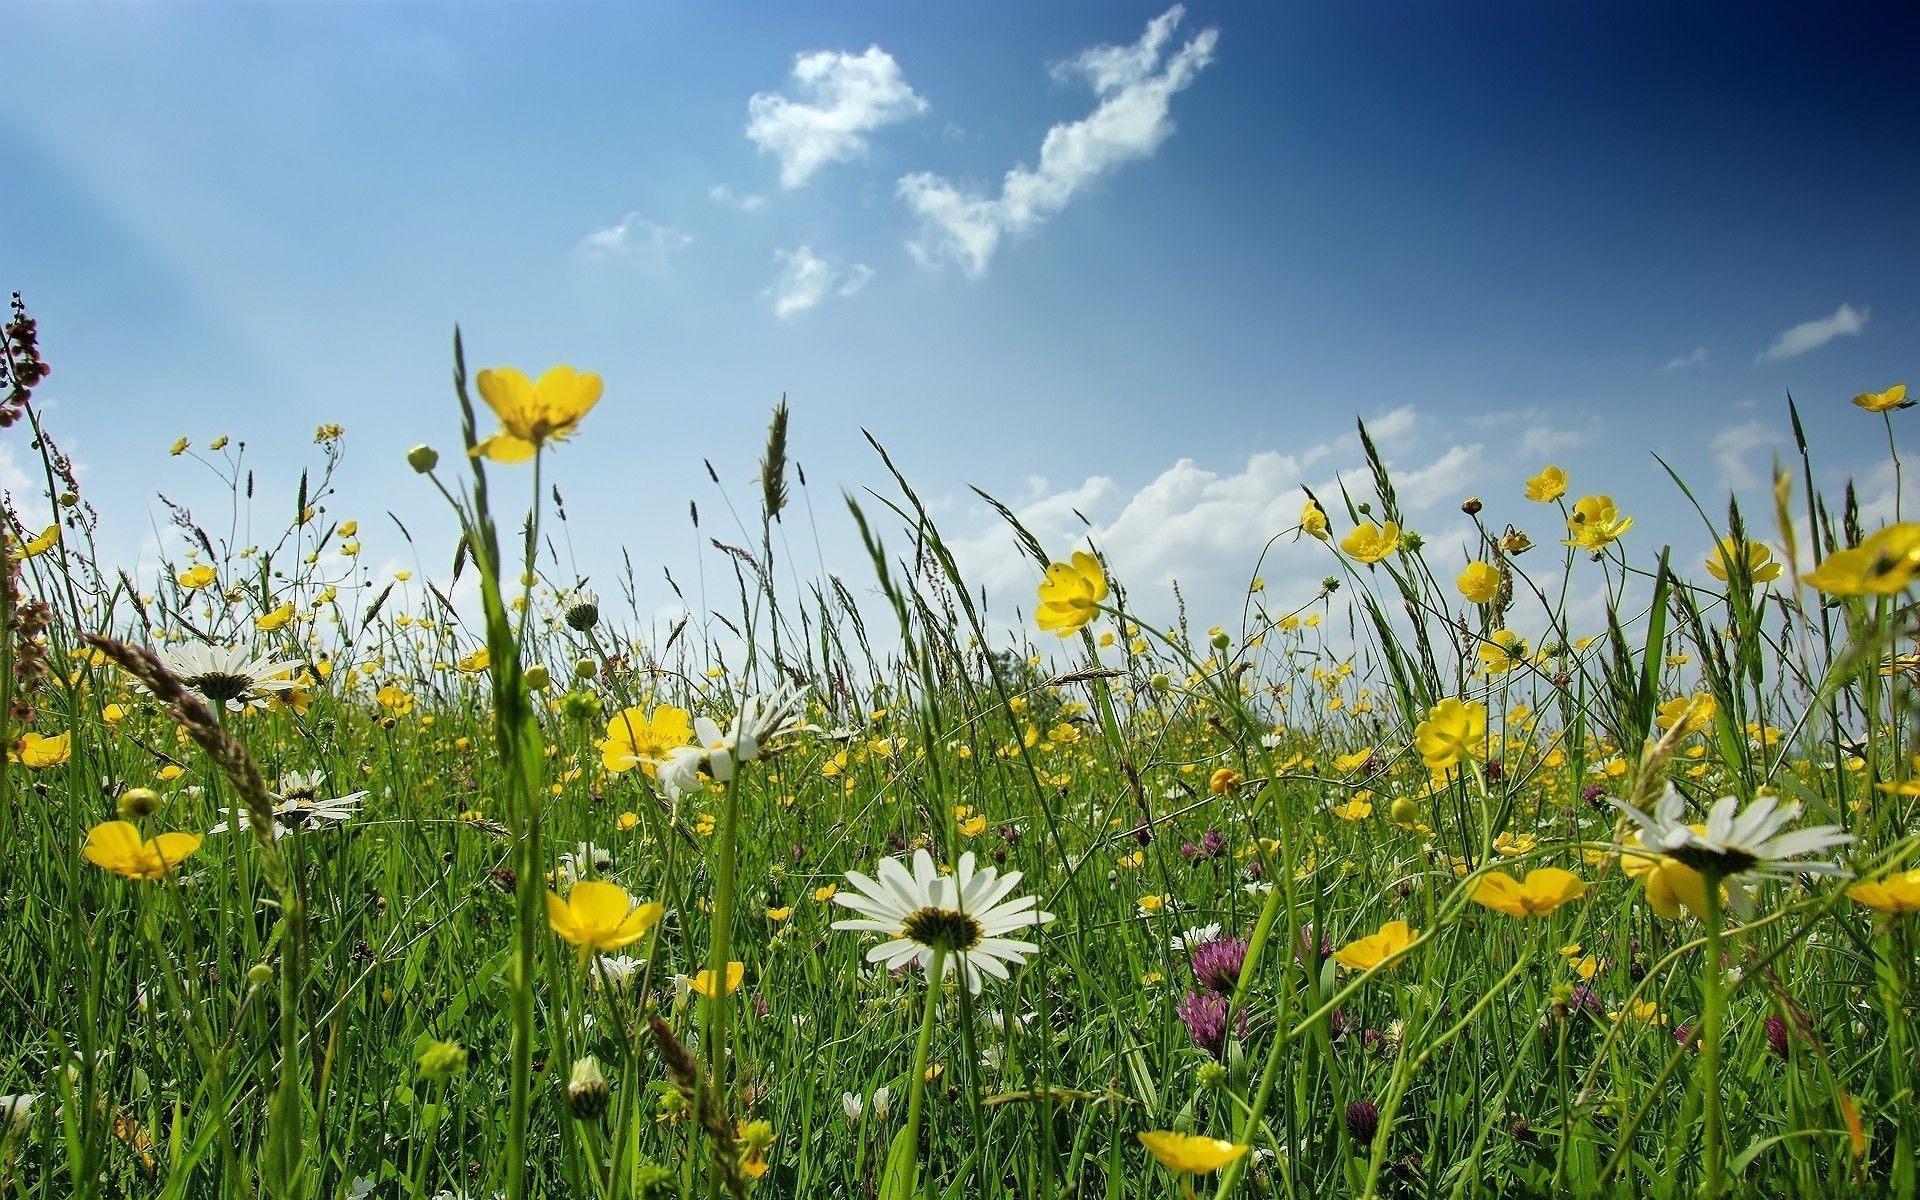 spring field wild flowers picture Image Search Results. Spring flowers background, Spring flowers wallpaper, Spring wallpaper